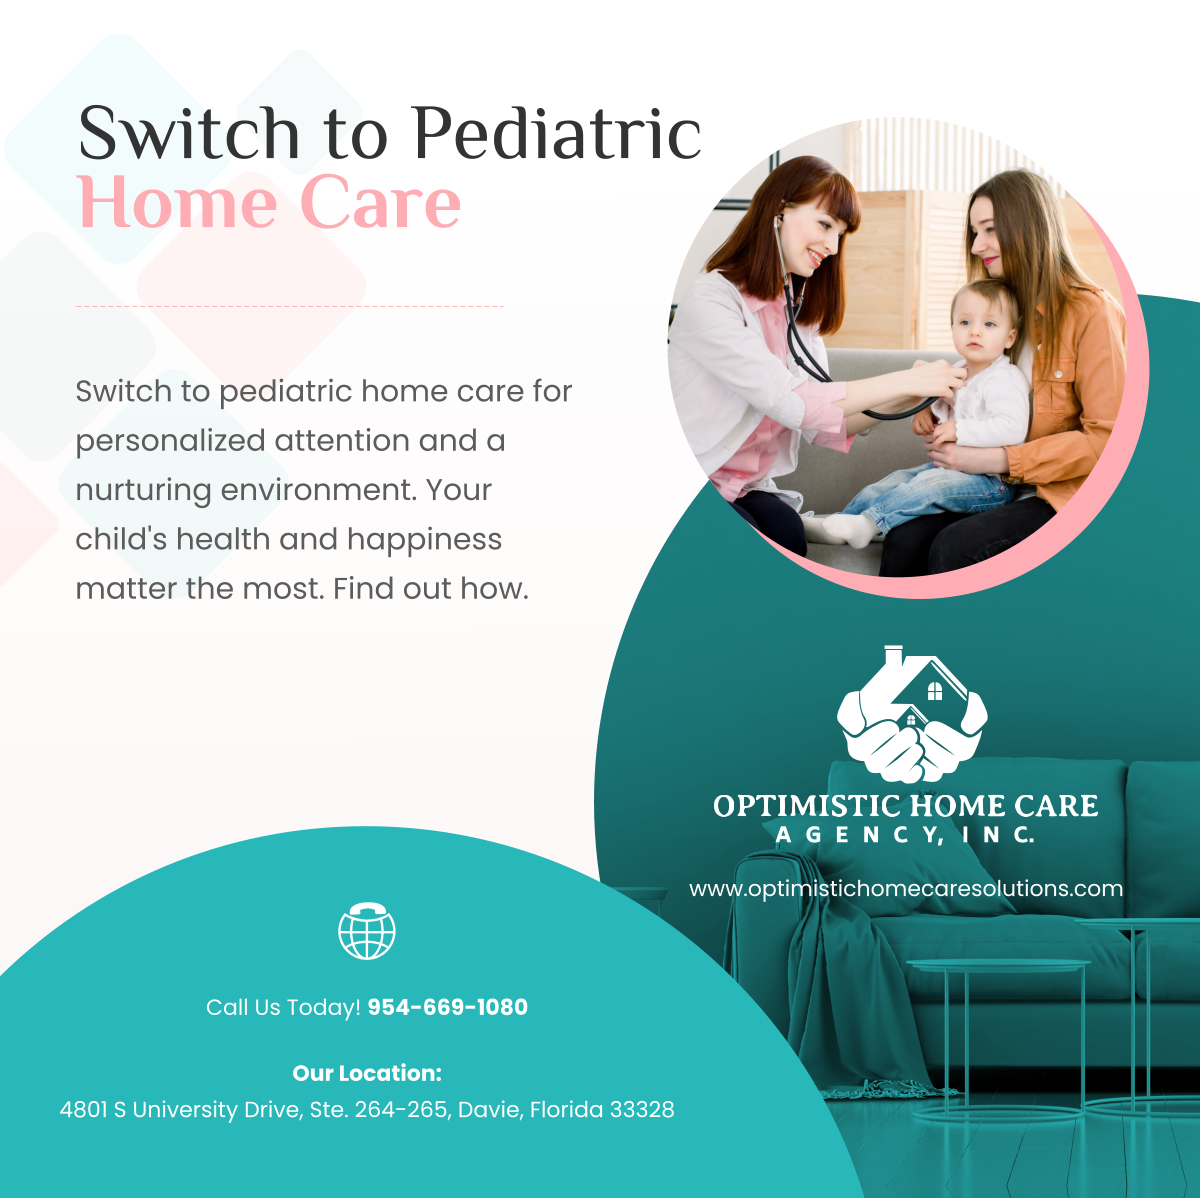 Switch to pediatric home care today. Your child's well-being, your home's comfort, and our dedicated care go hand in hand. Find out more when you visit tinyurl.com/m73kf73m.

#DavieFL #HomeHealthcare #HomeCare #PediatricHomeCare #ChildsWellBeing